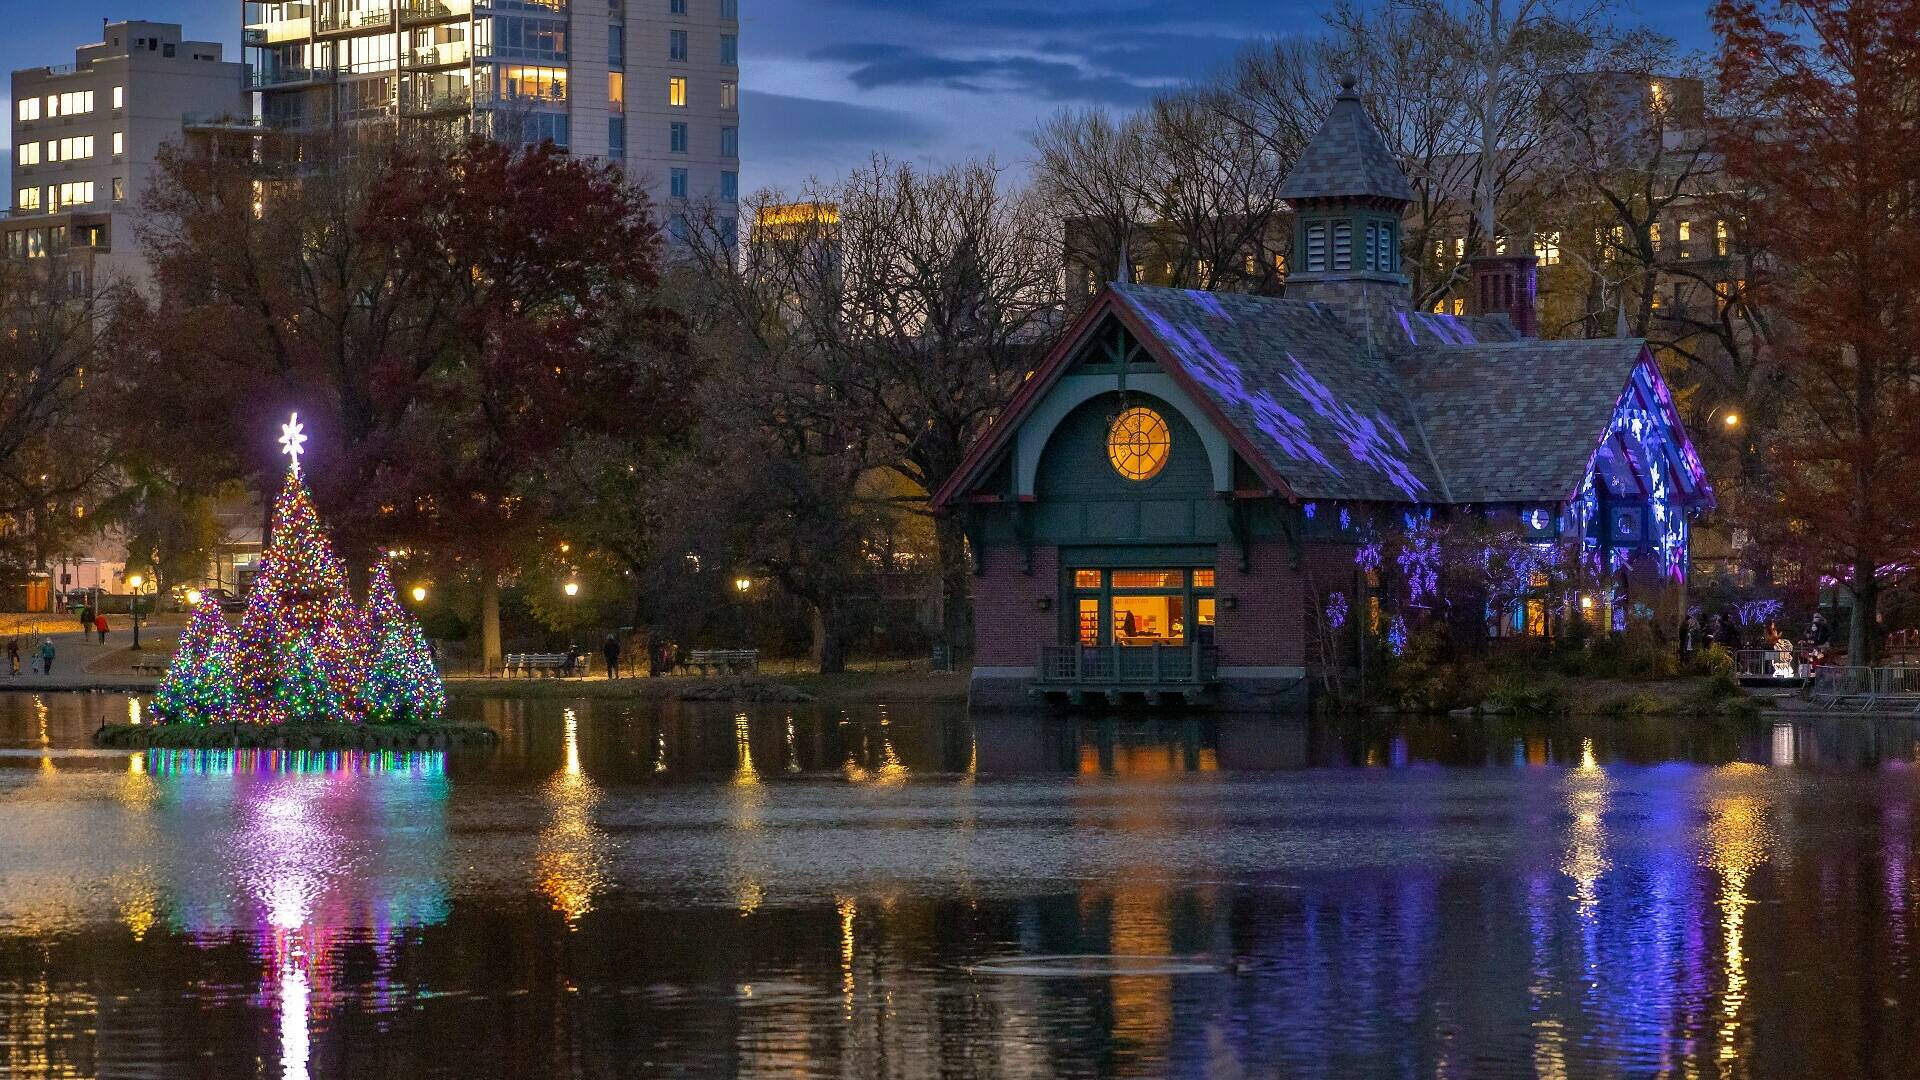 Central Park's holiday lighting will include lighting flotilla of trees